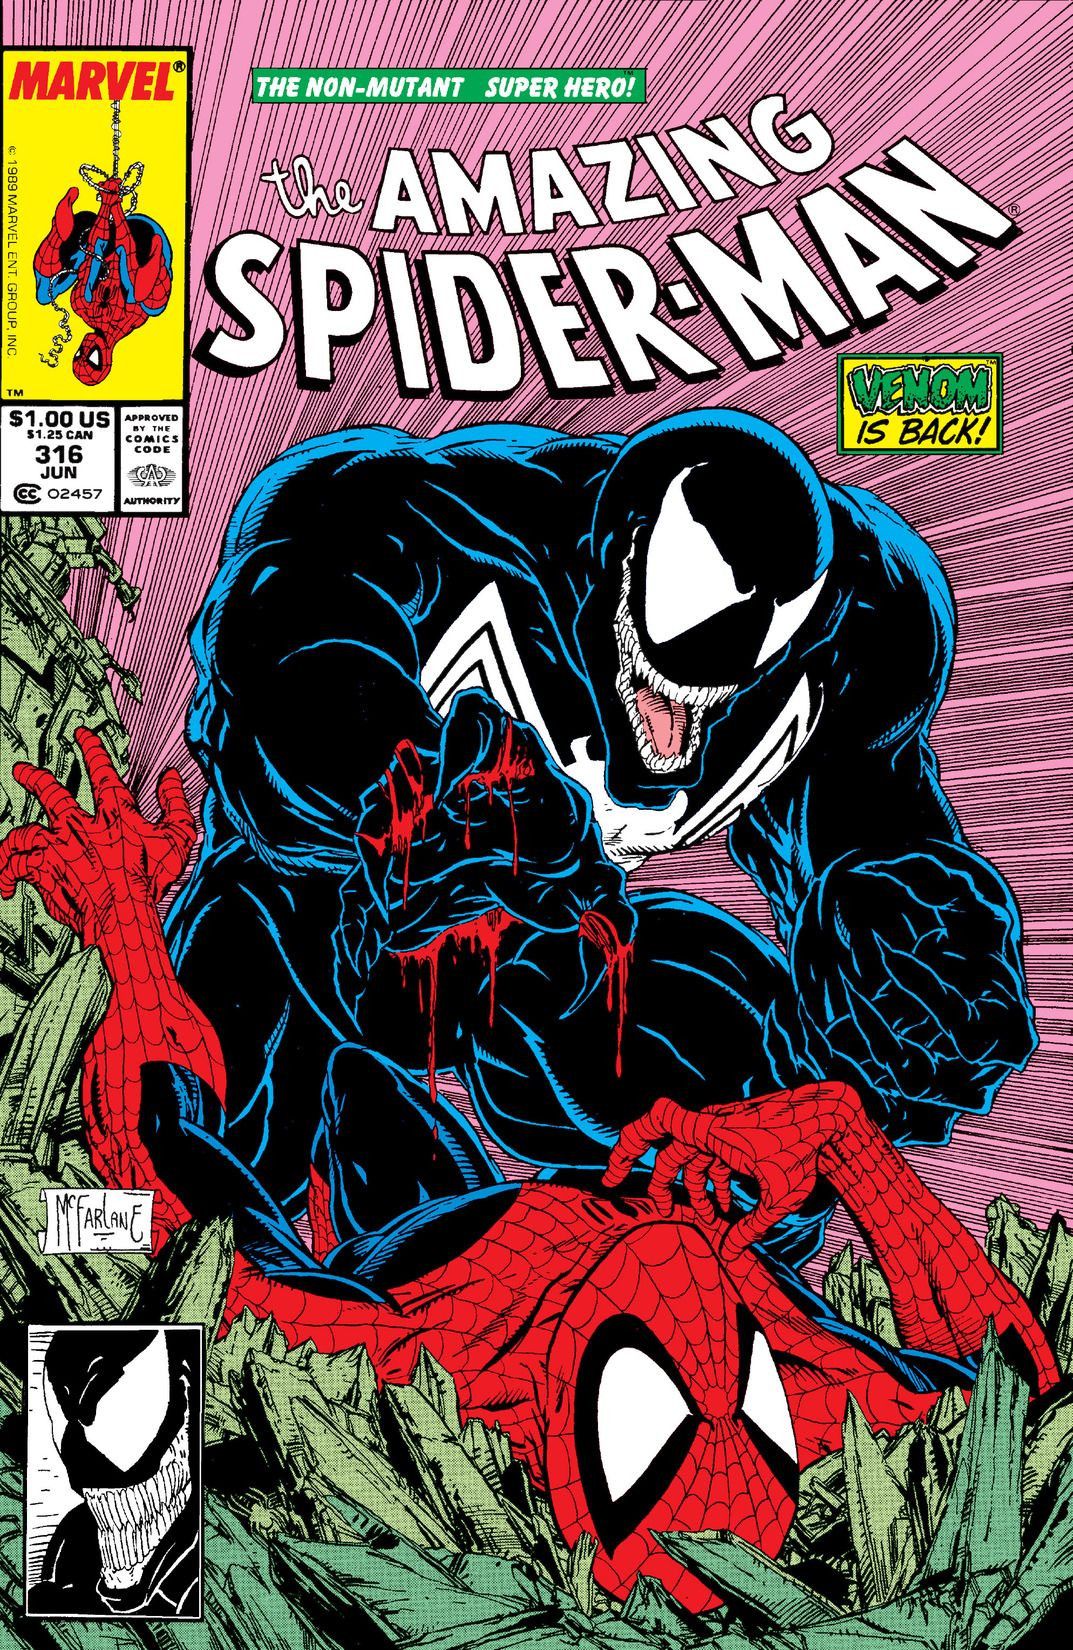 Todd McFarlane Was 'Forced' to Launch a Spider-Man Series for Marvel